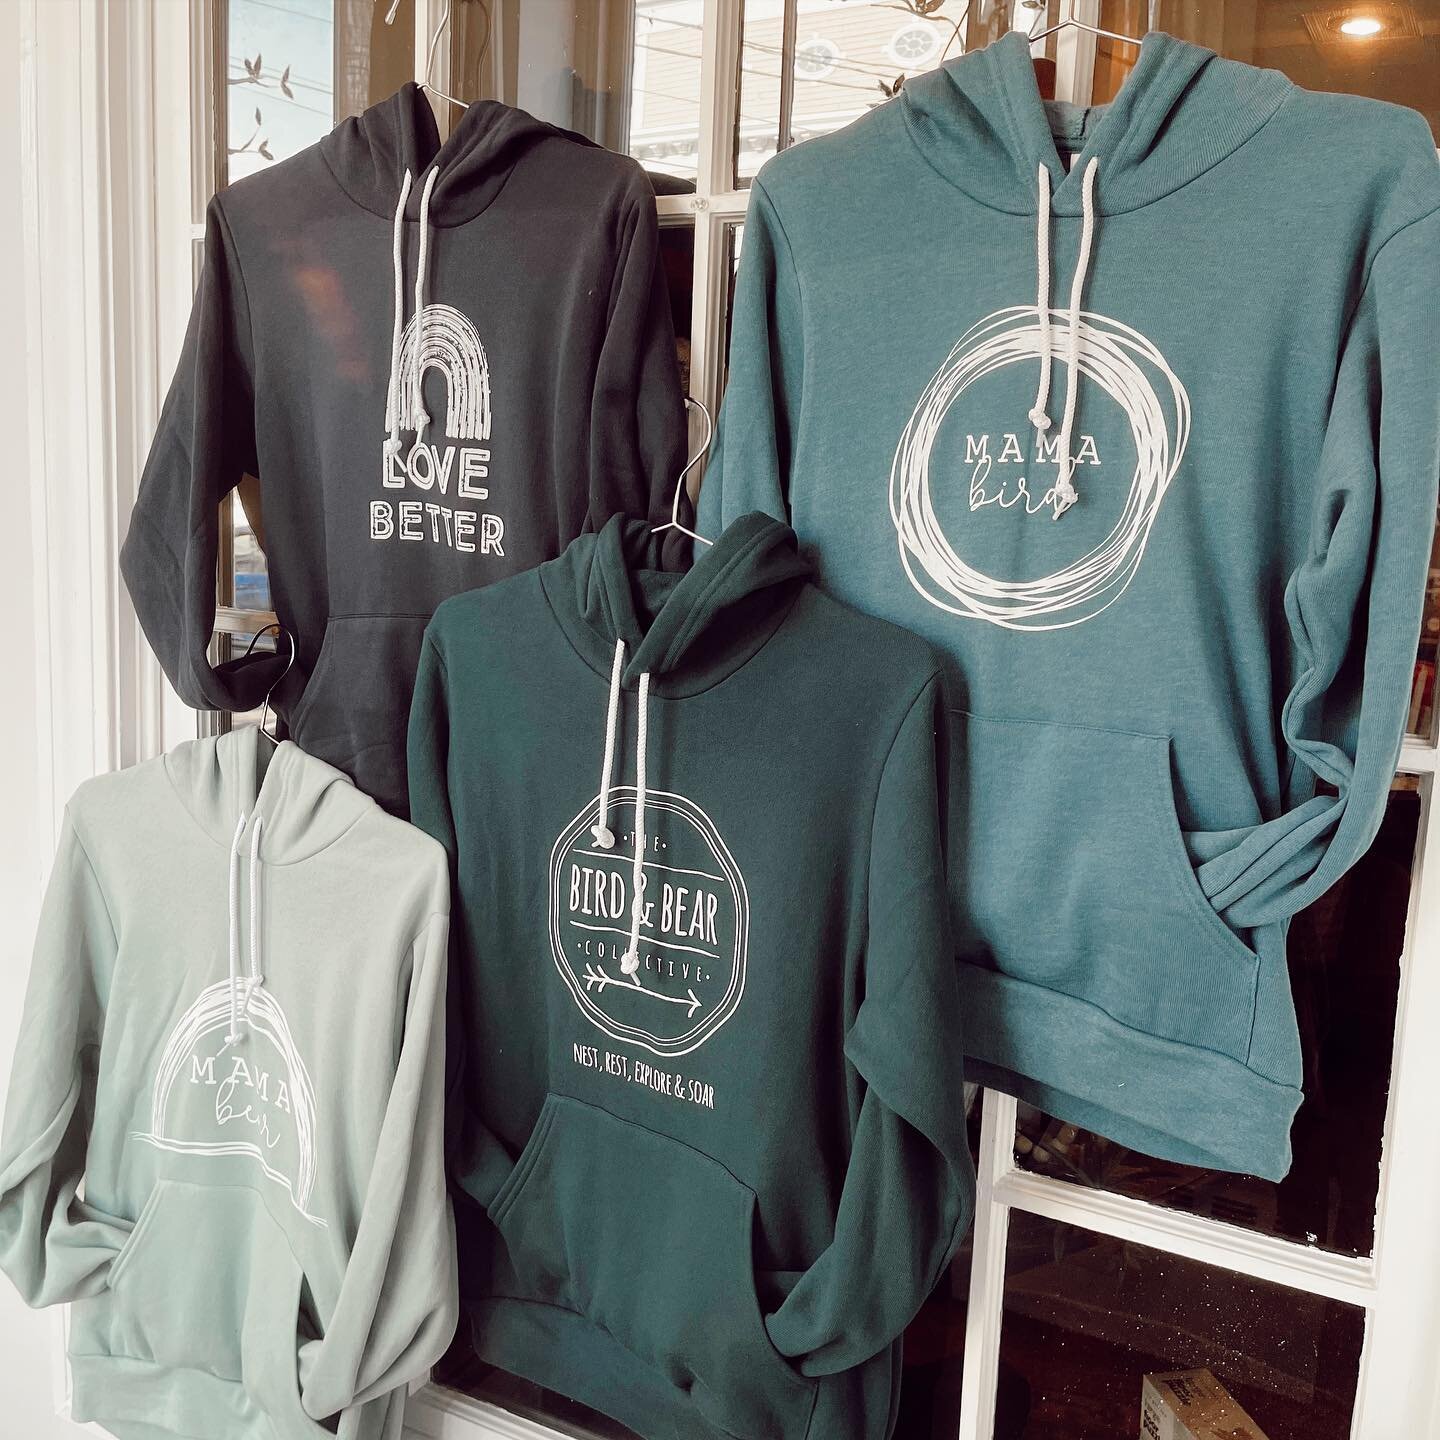 Is there anything better than a new Bird &amp; Bear hoodie on these crisp spring mornings? 

Shop is stocked with all of your favorites ~ in a pallet that is beckoning days at the beach! 

Open 10-2 today + we have some pop-up shop girls running the 